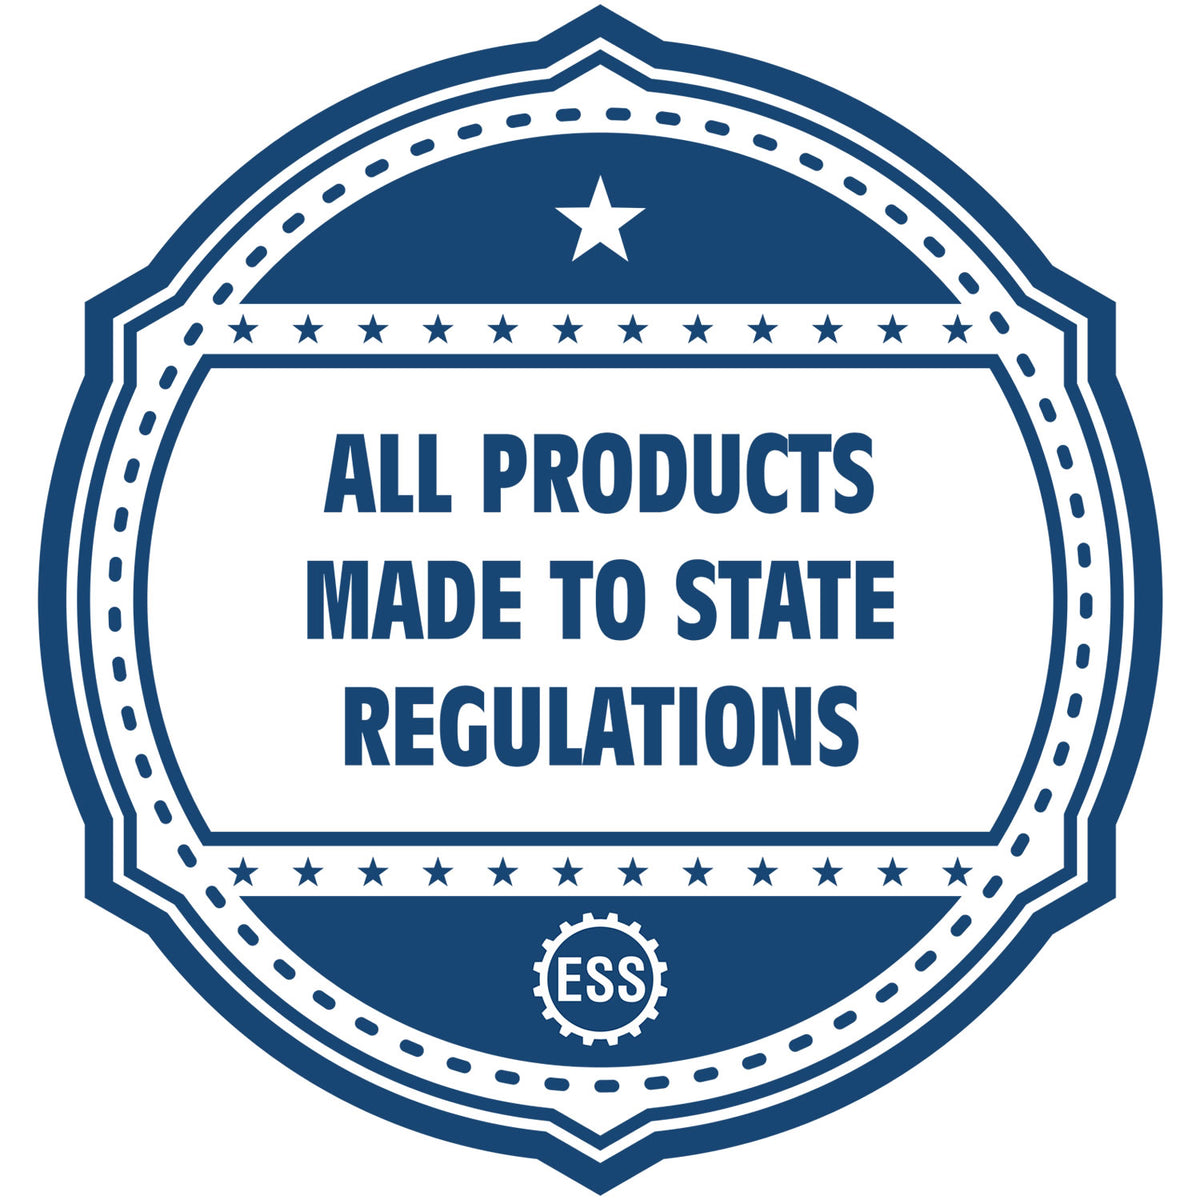 A blue icon or badge for the Hybrid Kentucky Architect Seal showing that this product is made in compliance with state regulations.